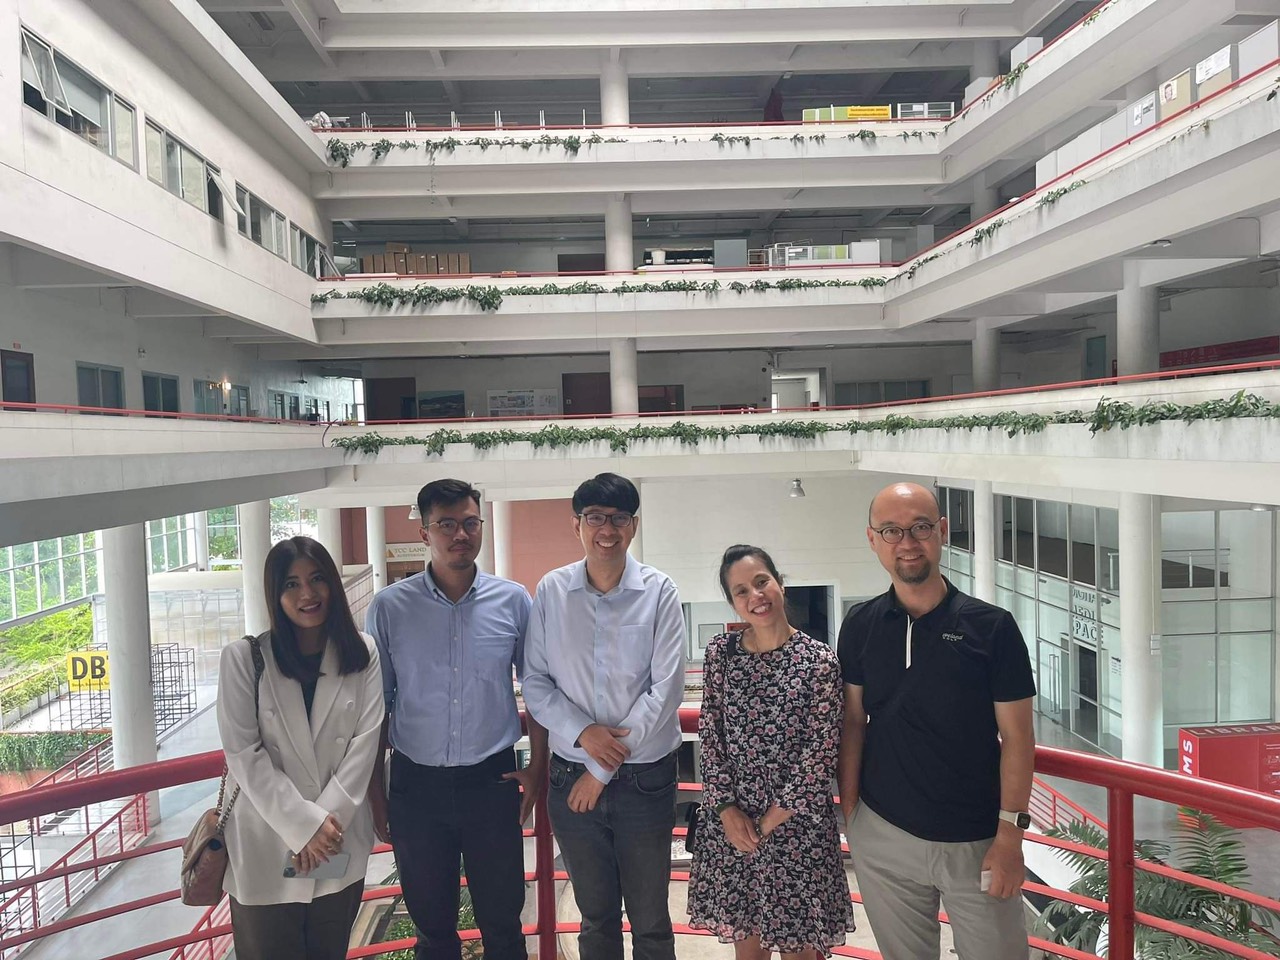 PARTNERSHIP NEWS | MEETING BETWEEN INSTITUTE OF SMART CITY AND MANAGEMENT - UEH COLLEGE OF TECHNOLOGY AND DESIGN (ISCM), HANDONG GLOBAL UNIVERSITY (KOREA), AND THAMMASAT UNIVERSITY (THAILAND)